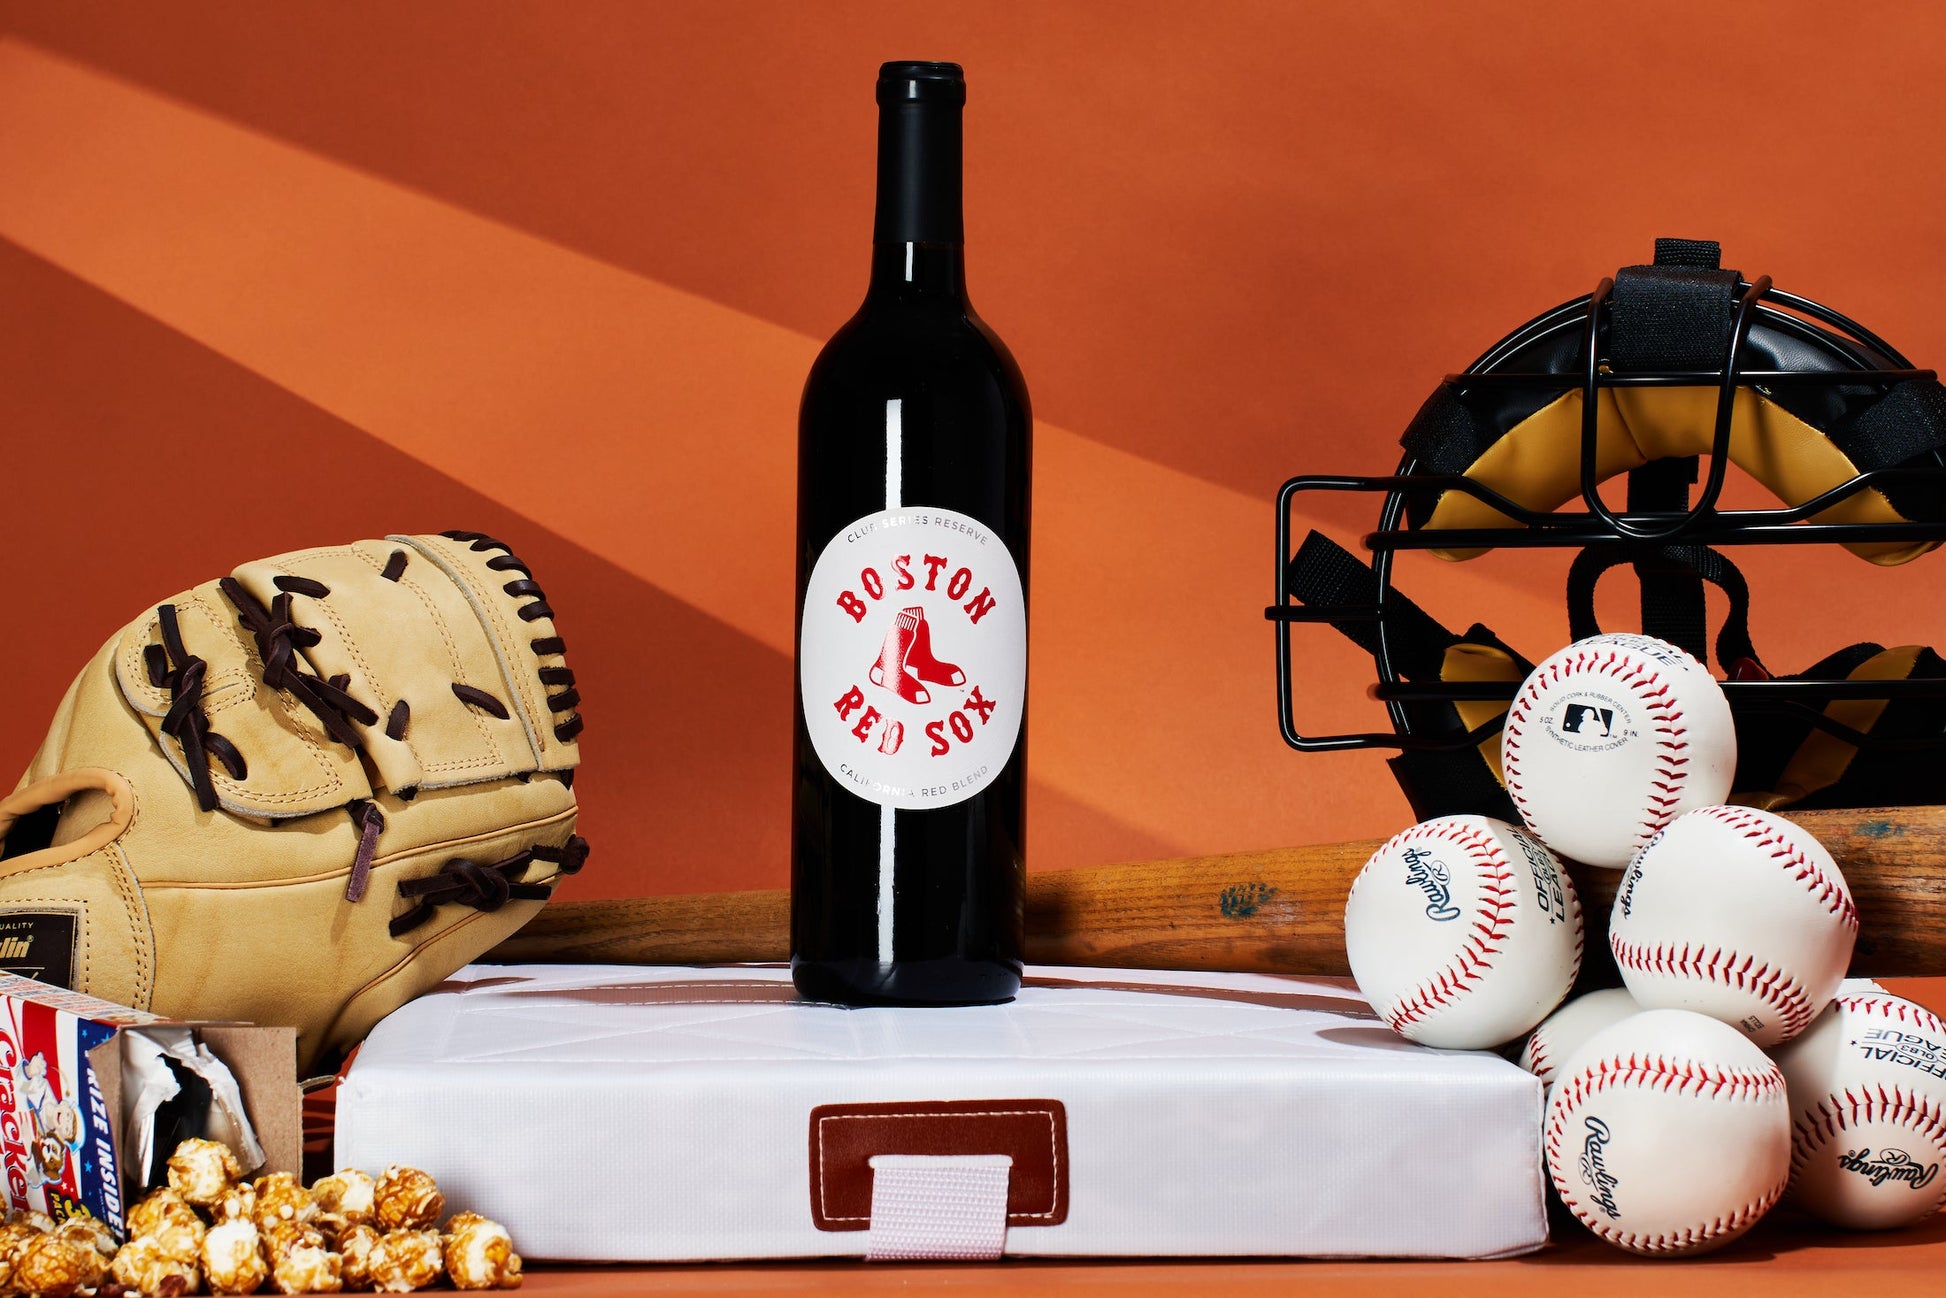 Boston Red Sox 4-Pack Wine Gift